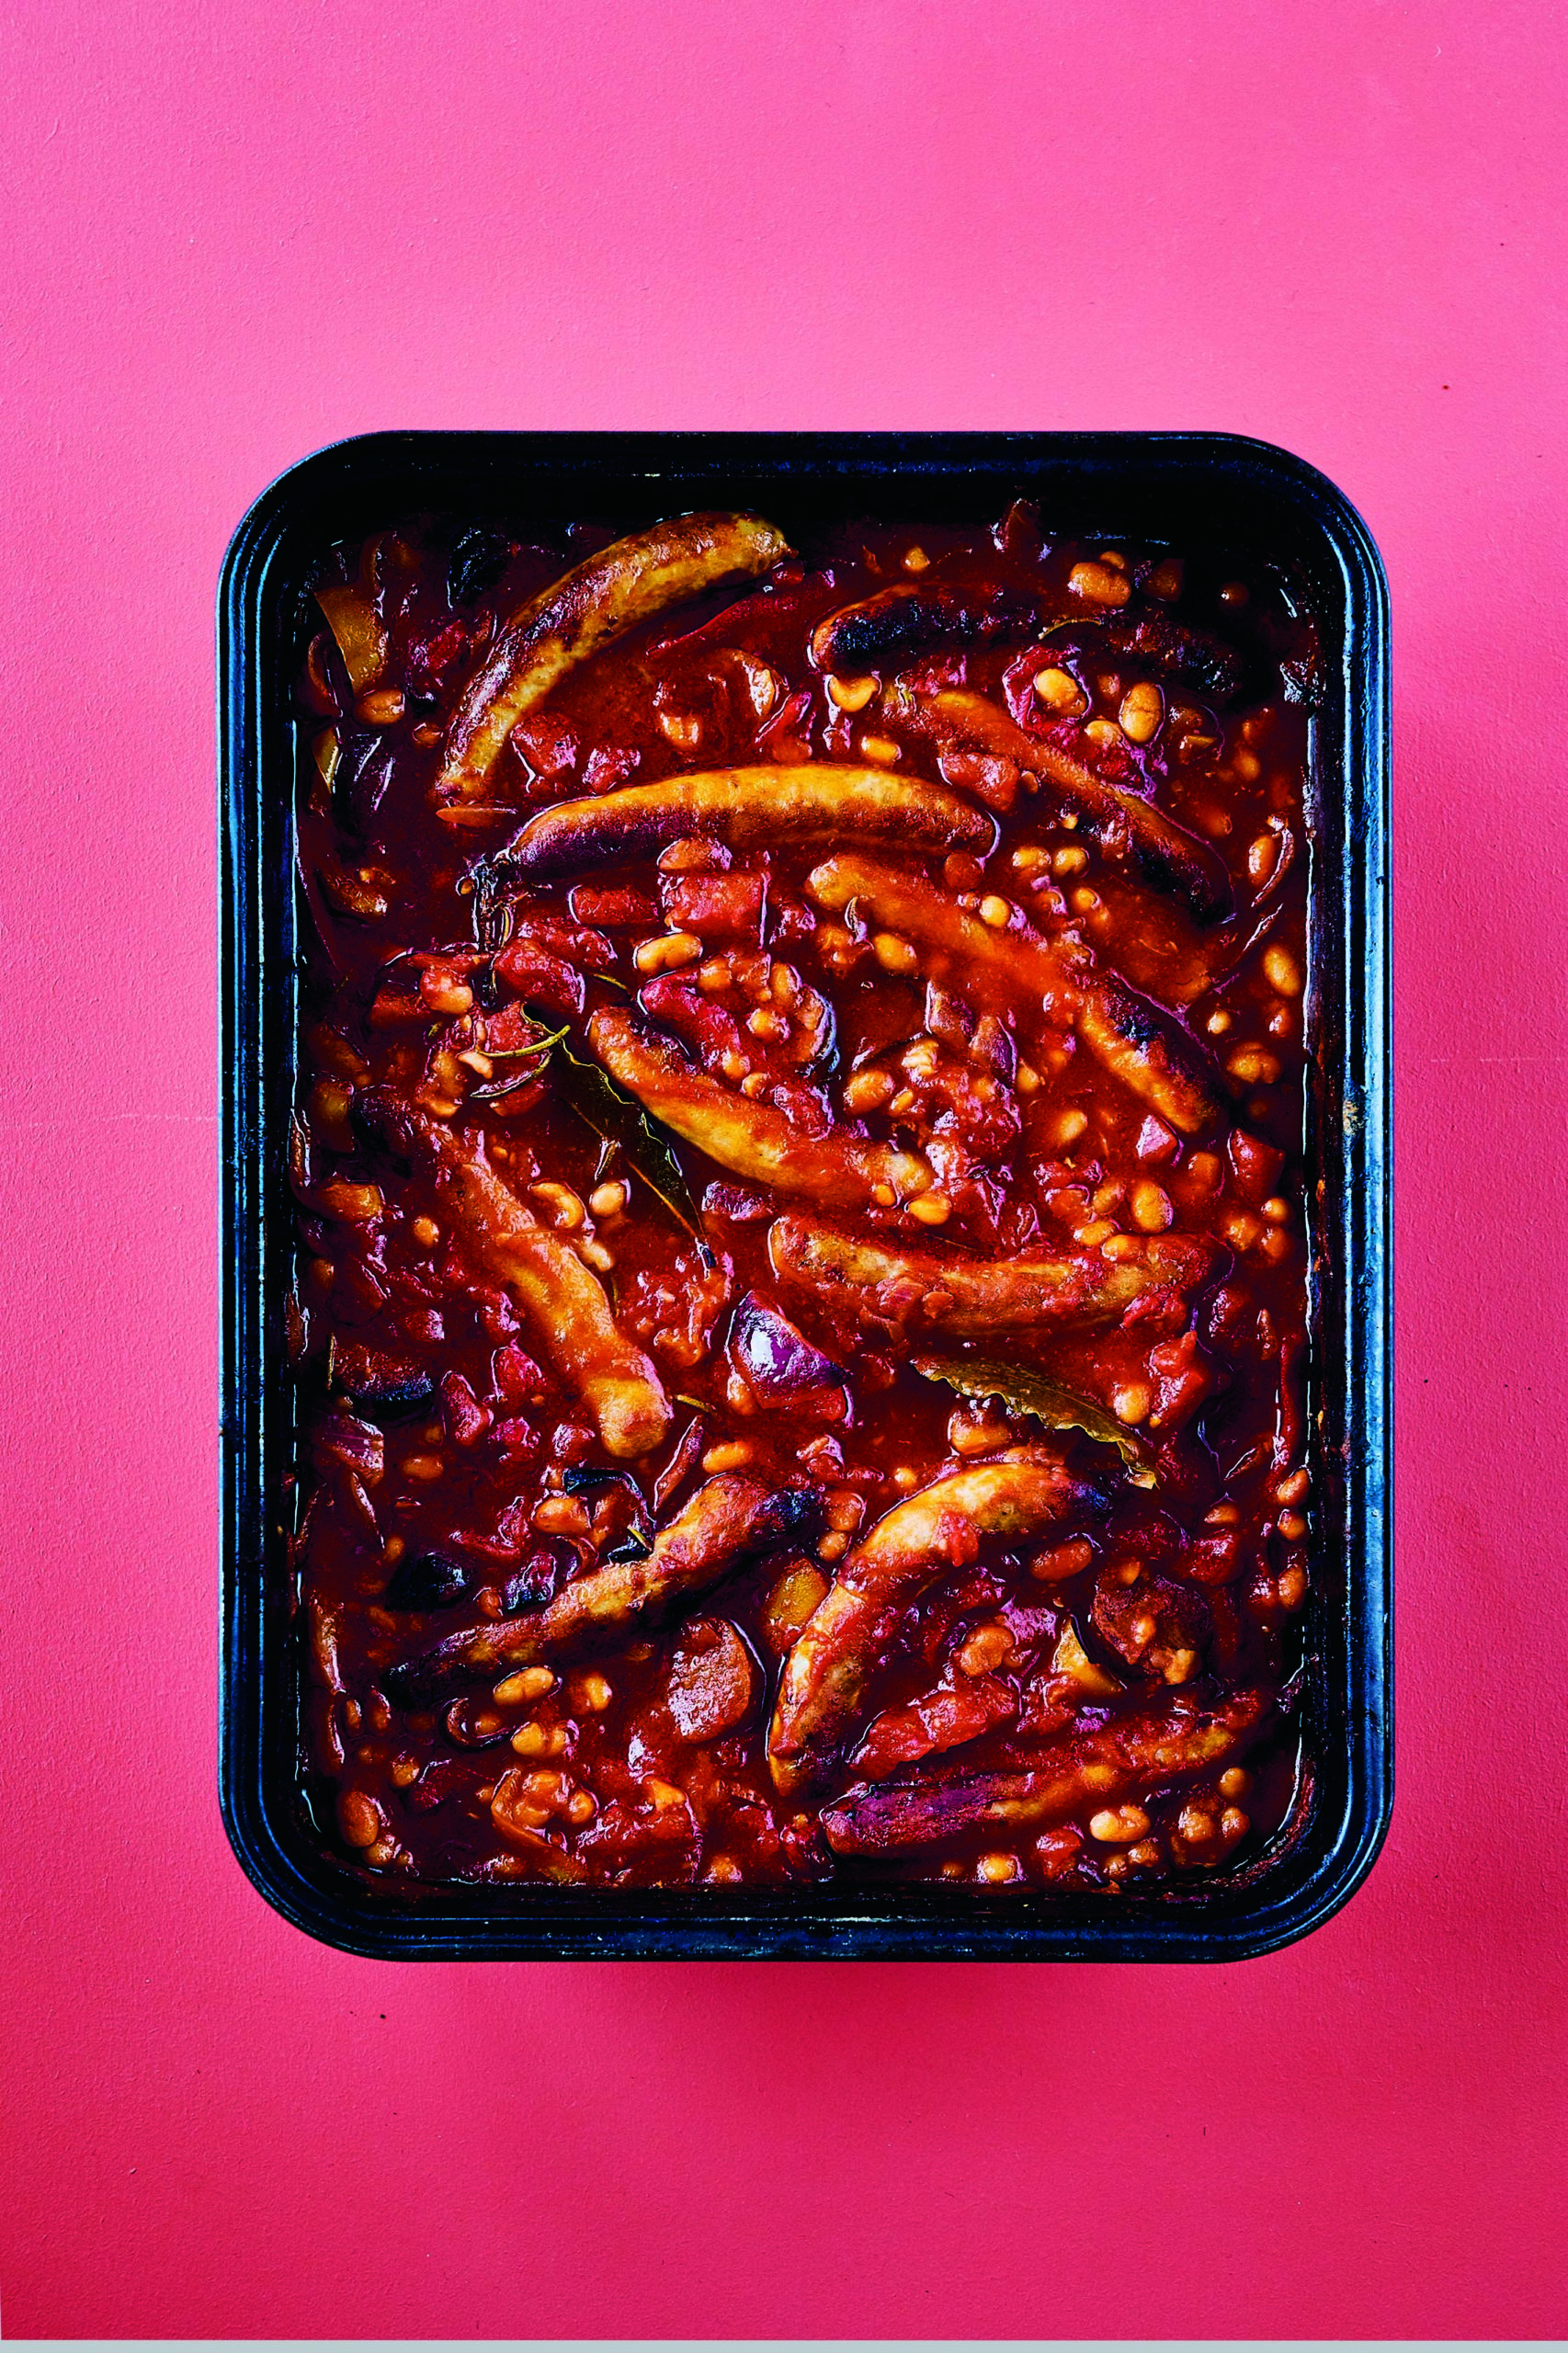 Rukmini Iyer’s Smoky Sausage Casserole with Chorizo, Peppers, and Beans